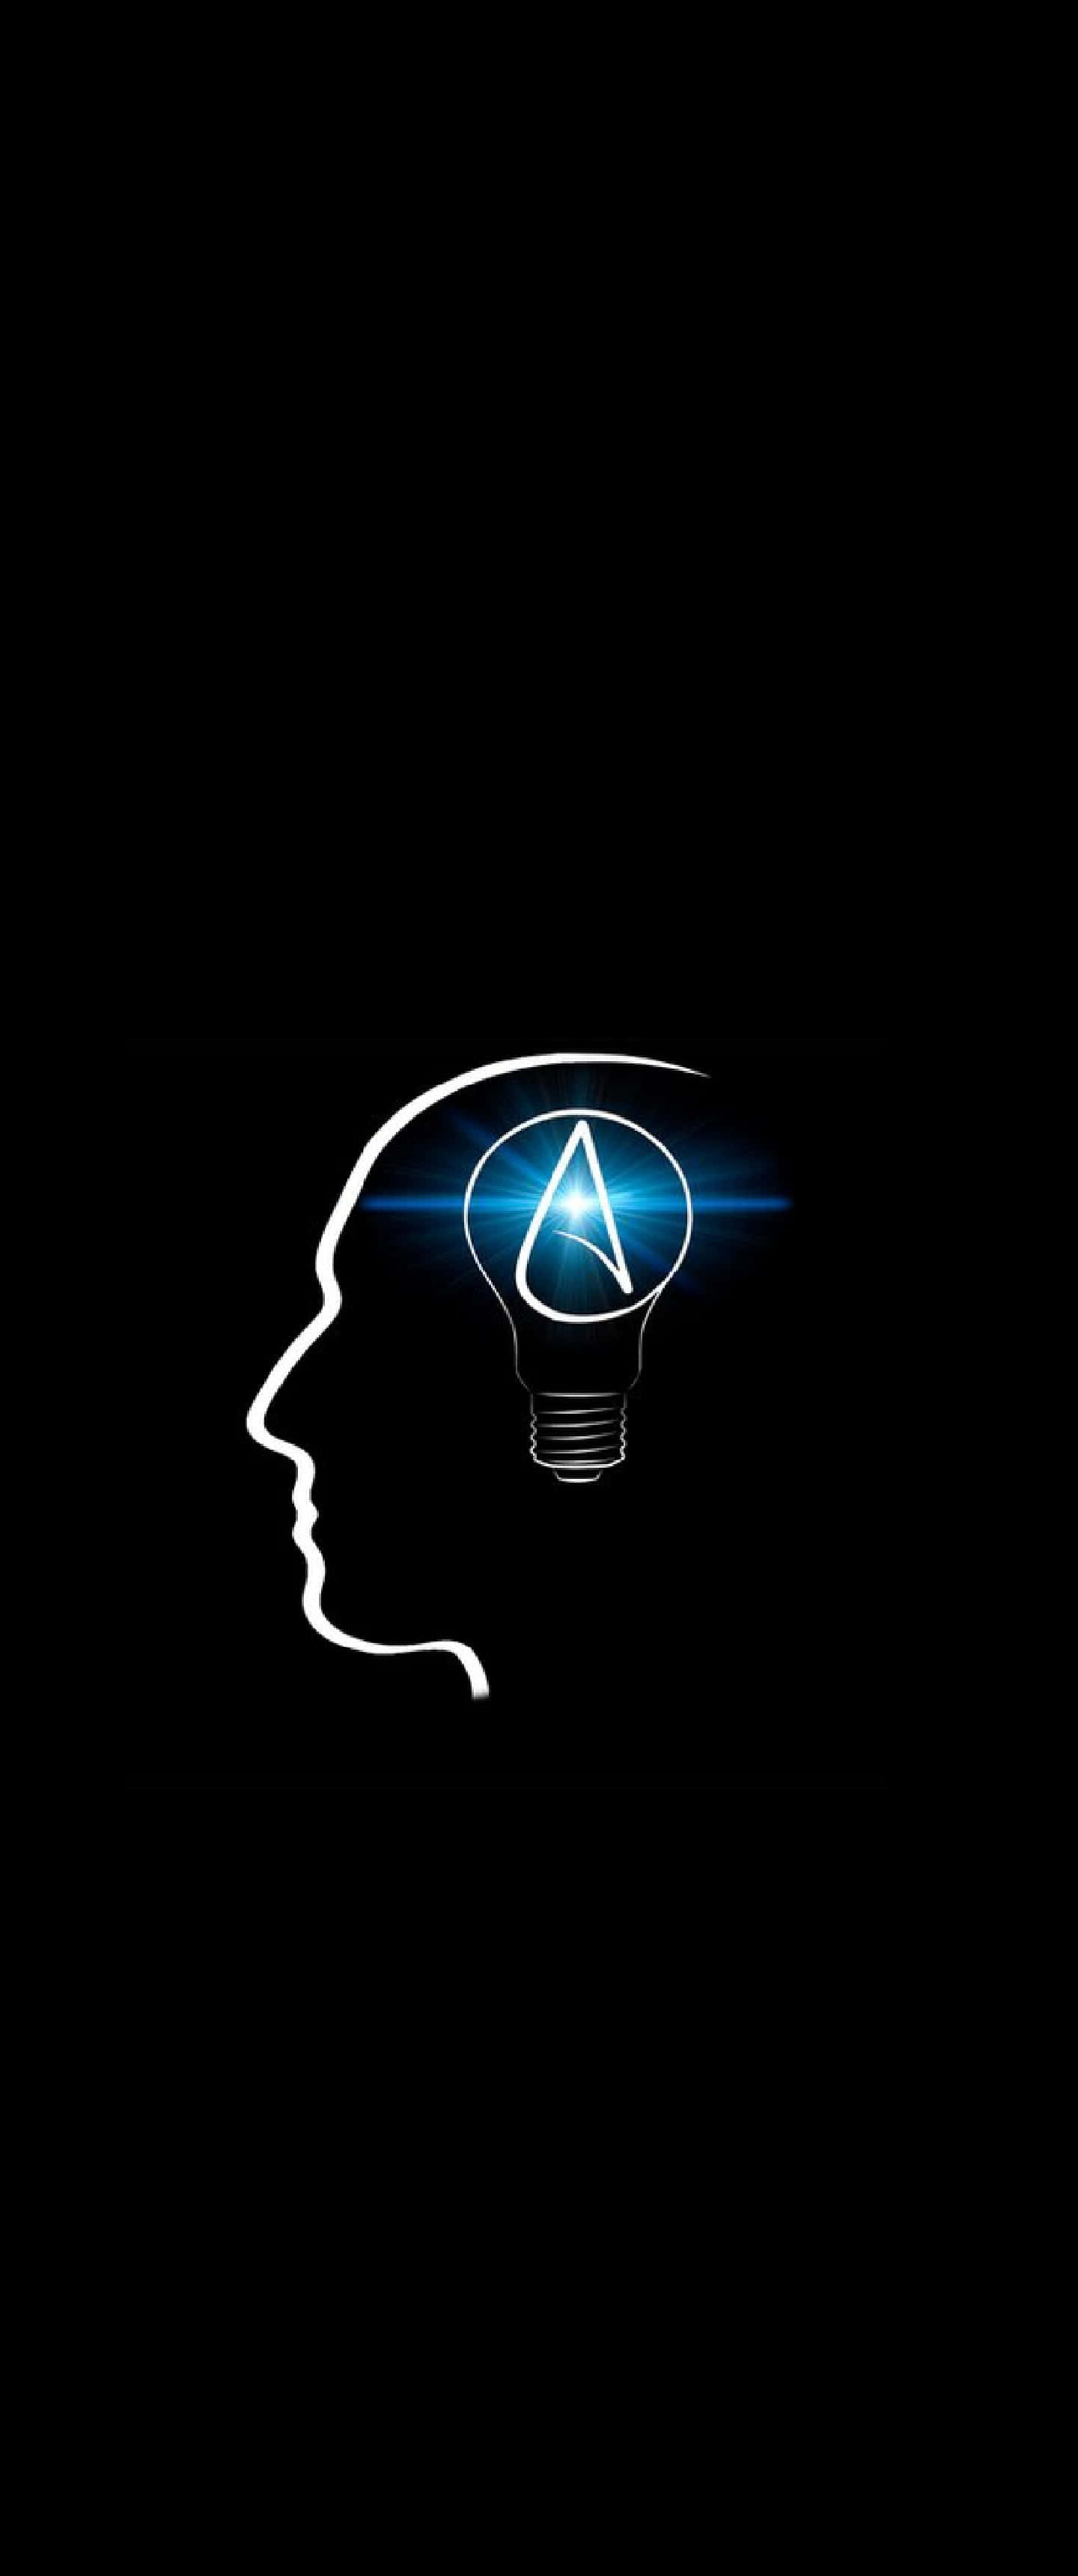 A Logo With A Light Bulb In The Head